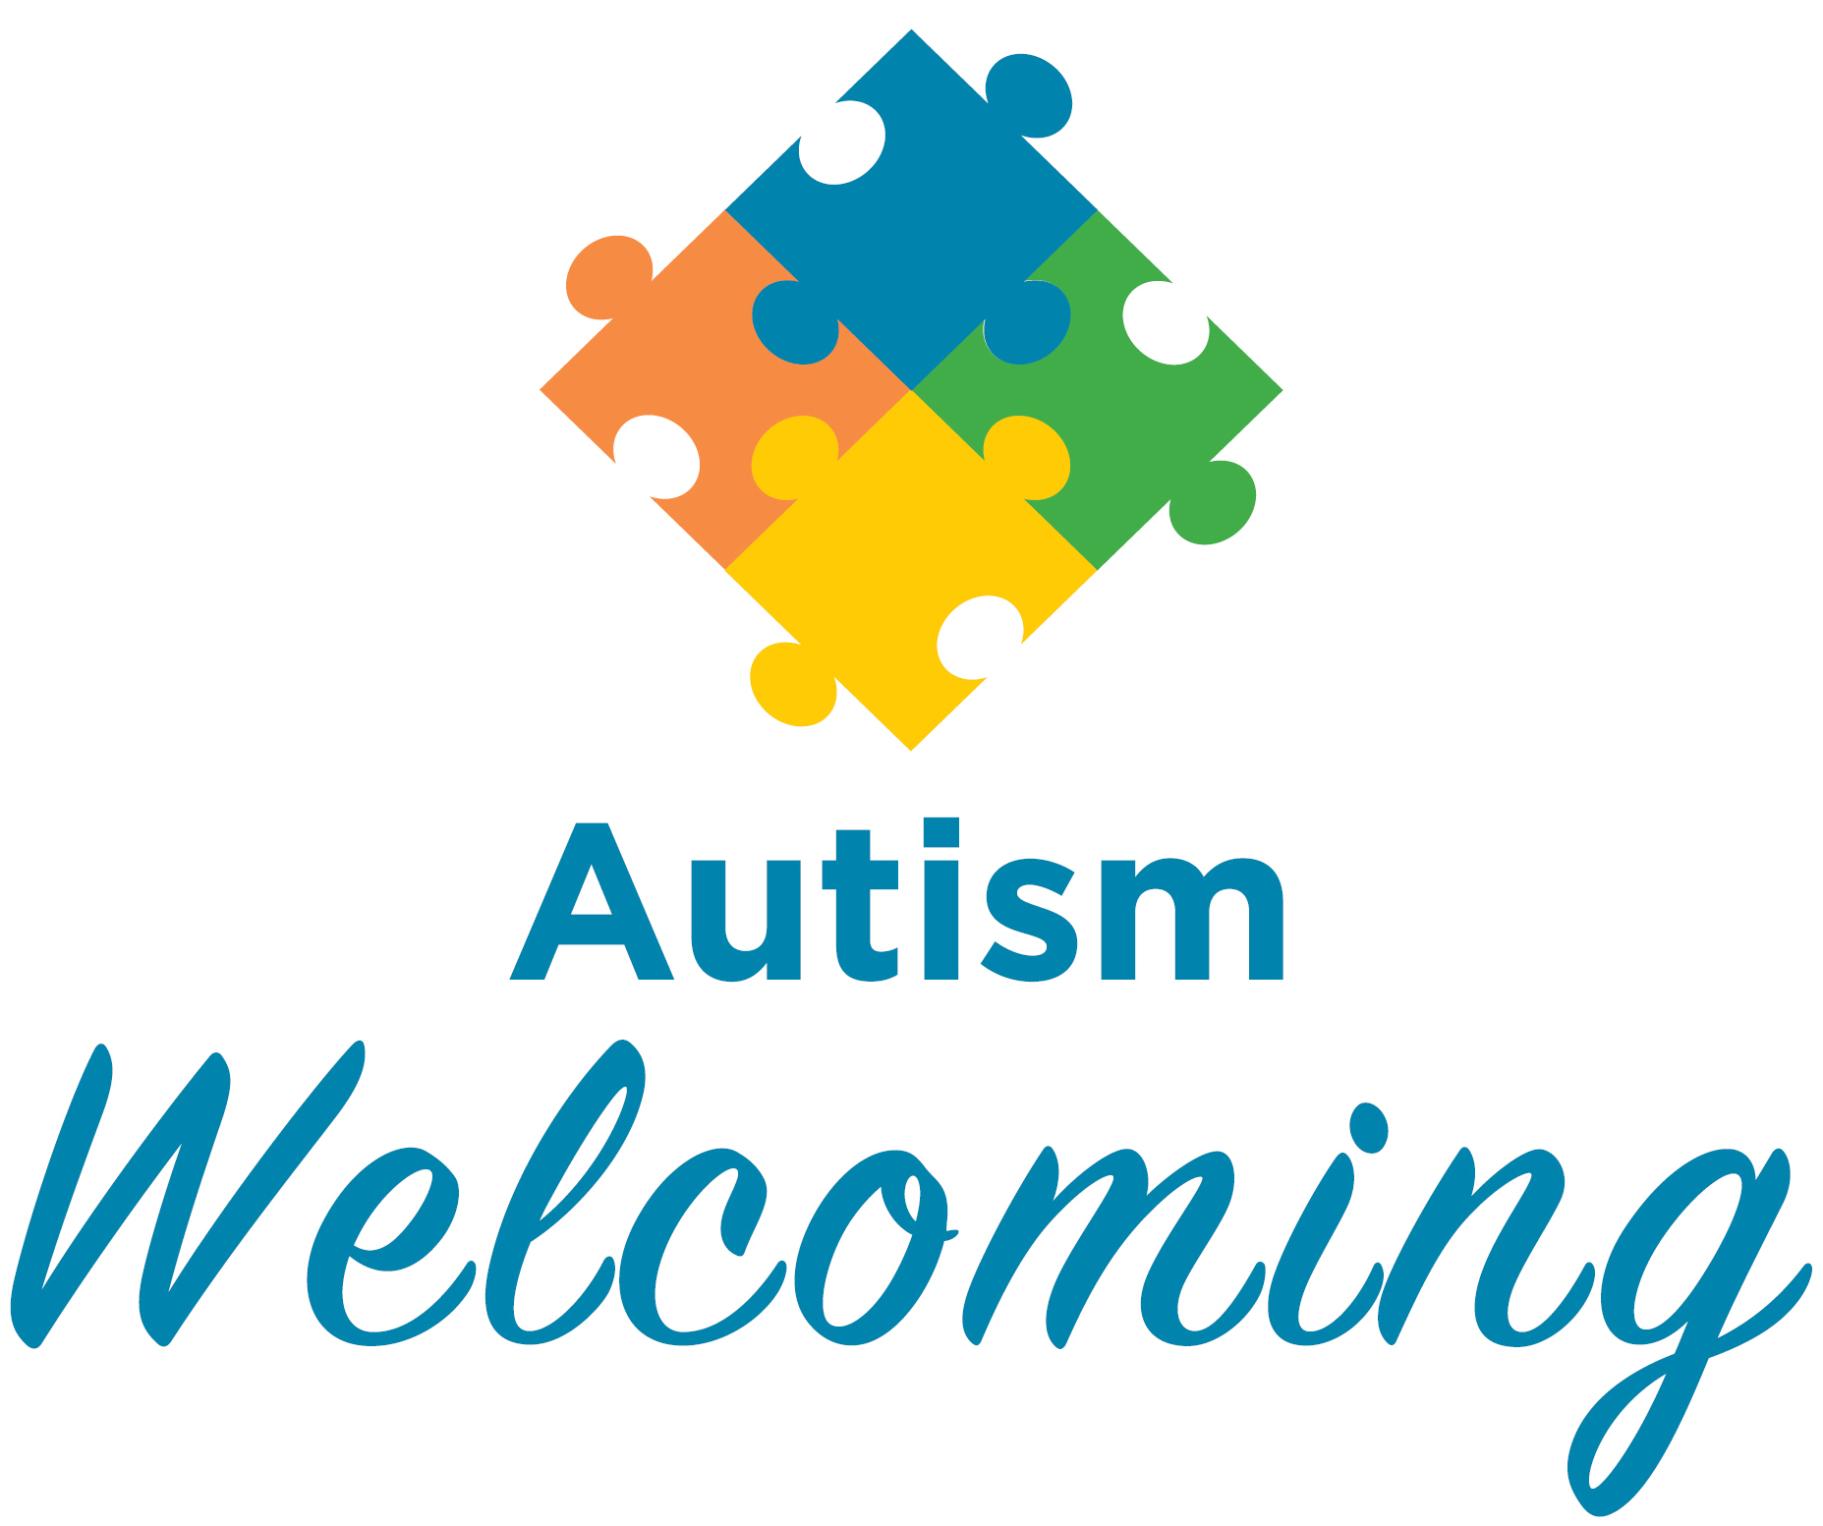 graphic that says, "Autism Welcoming" with four interconnected puzzle pieces above